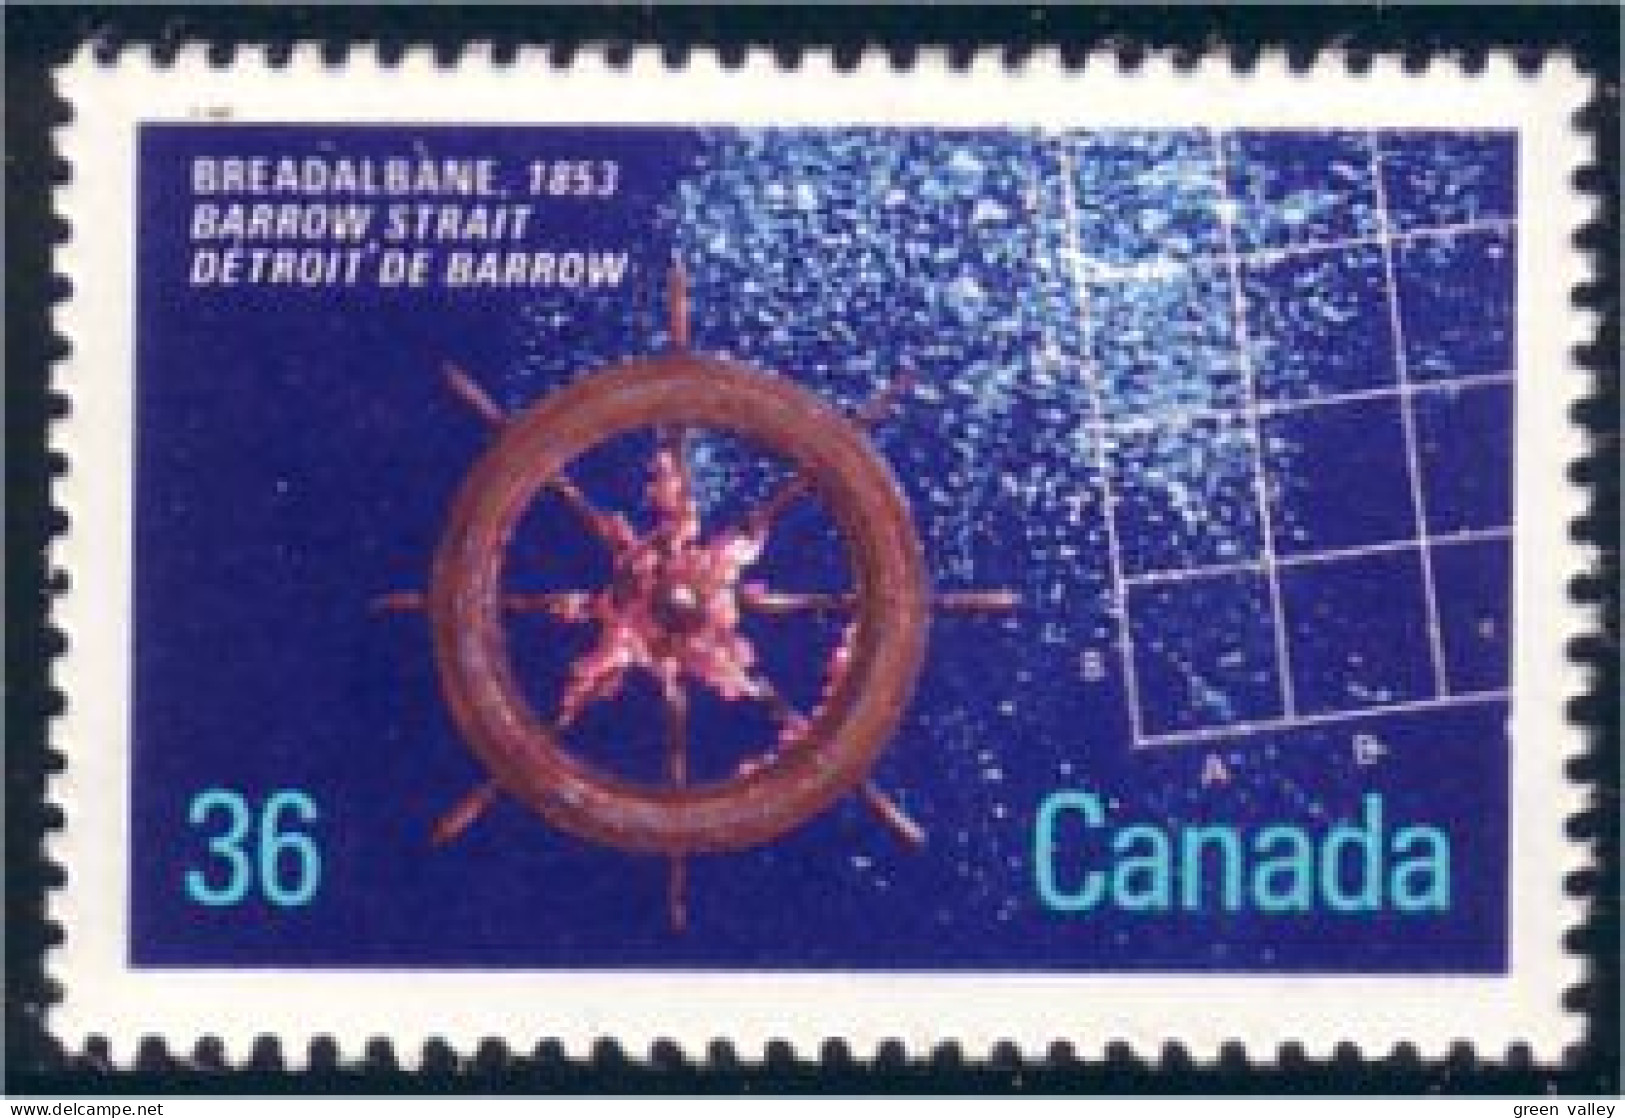 Canada Naufrage Breadalbane 1853 Shipwreck MNH ** Neuf SC (C11-43a) - Unused Stamps